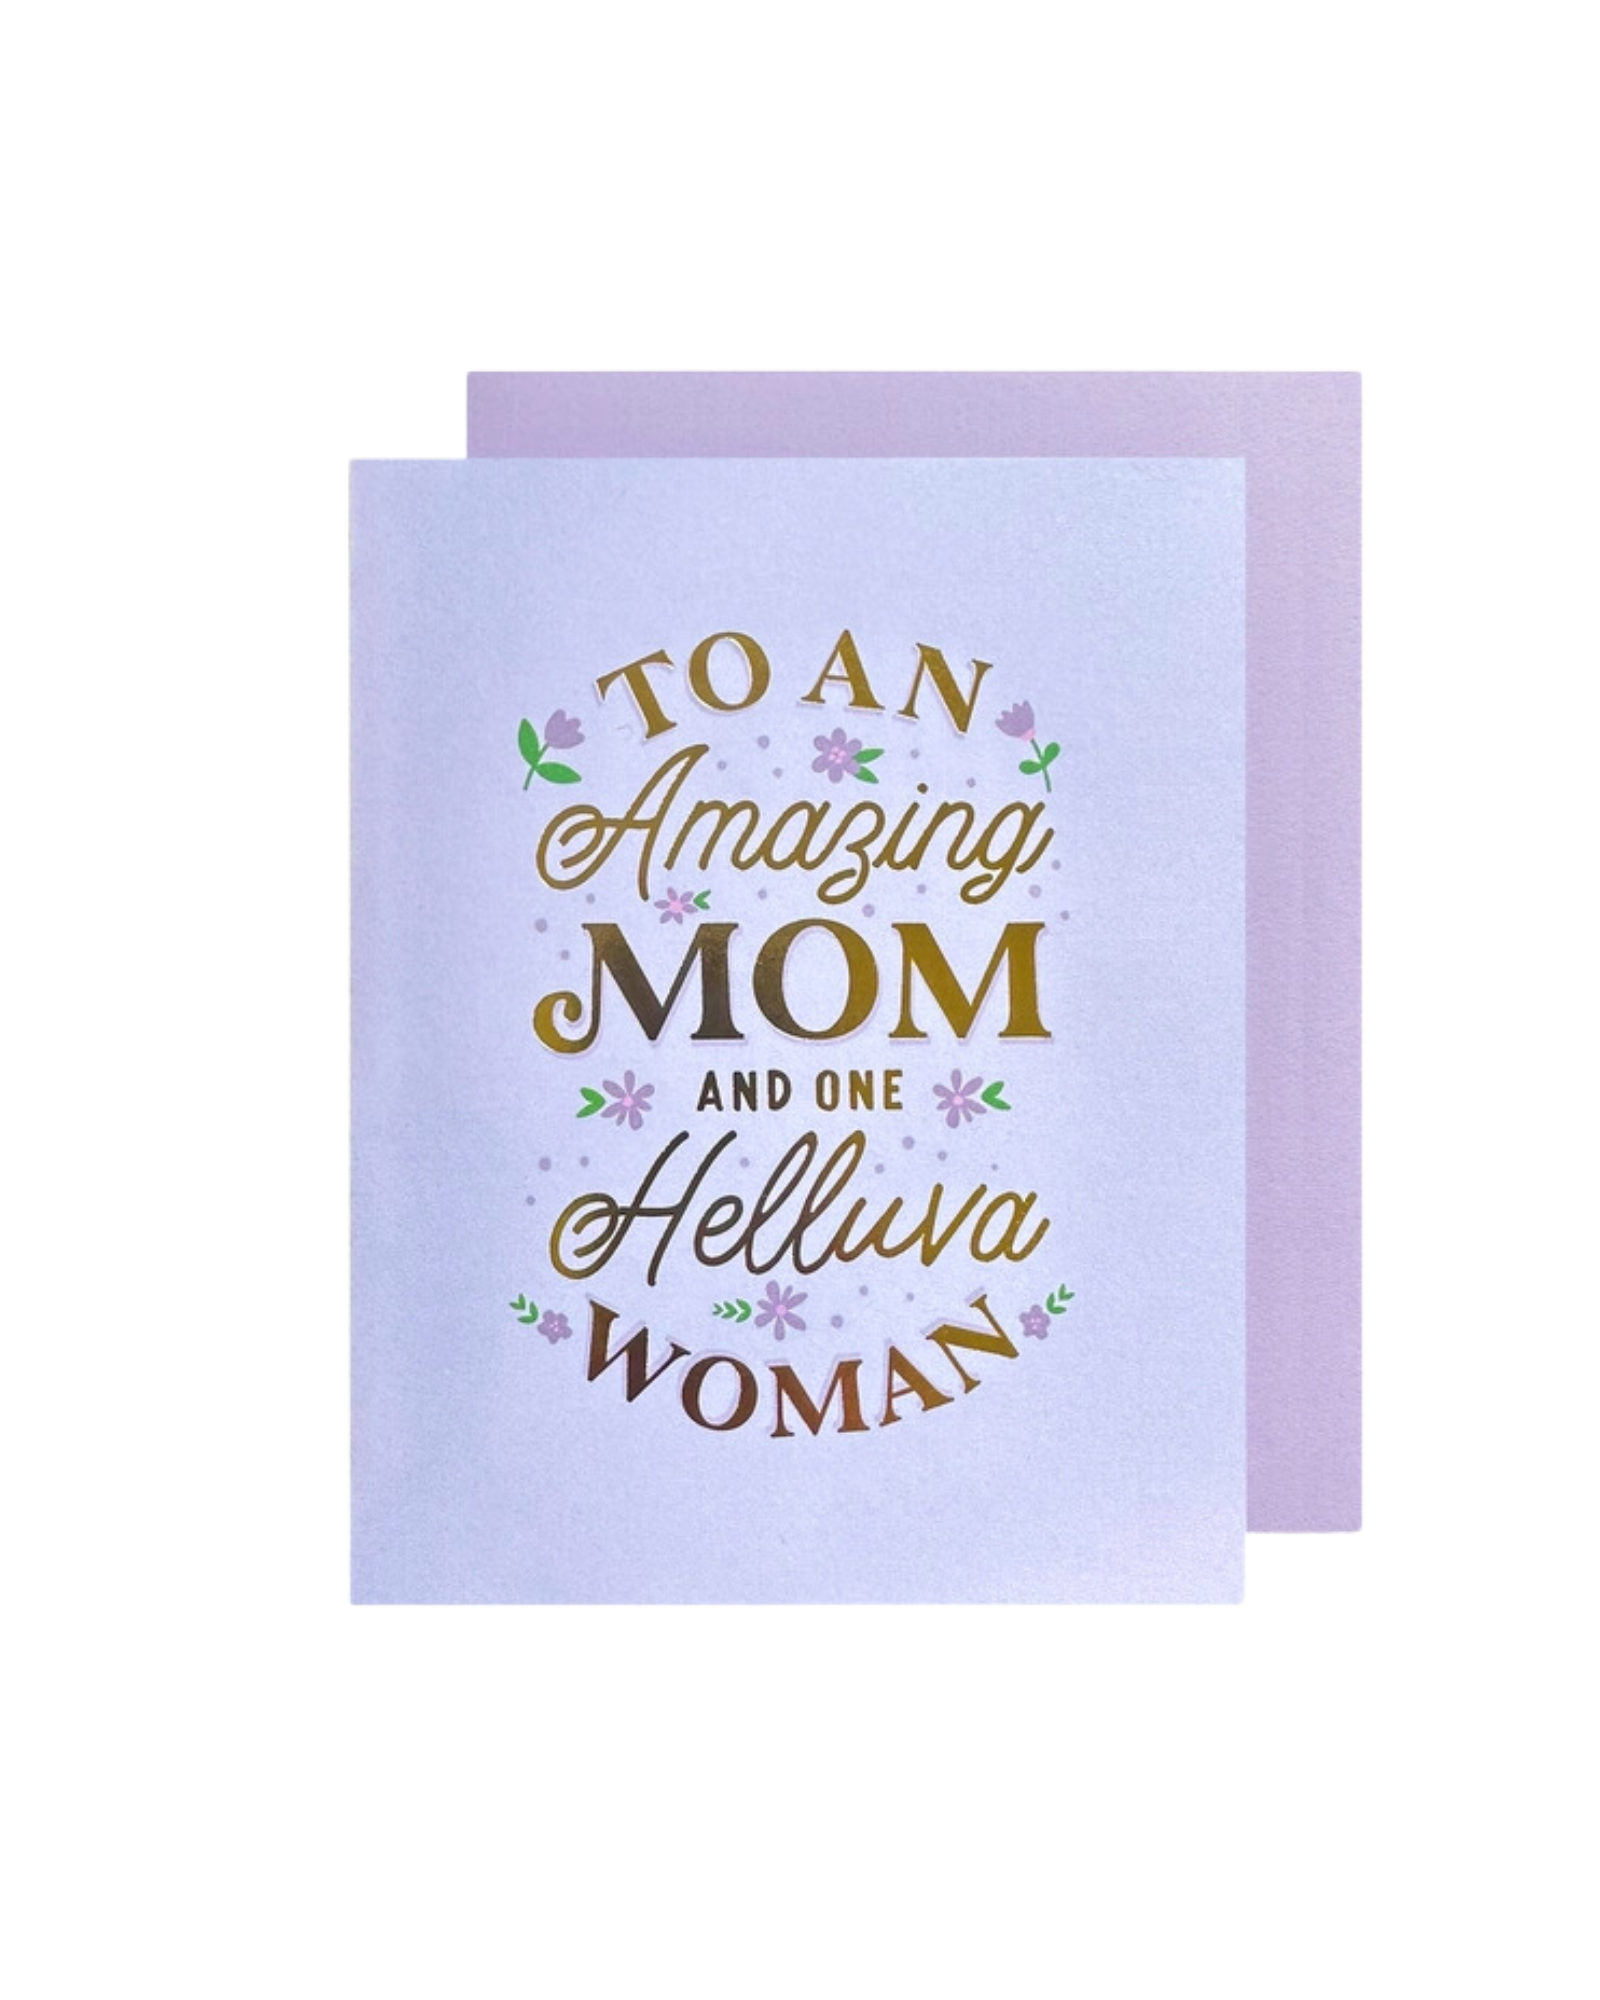 Helluva Woman Mother's Day Greeting Card